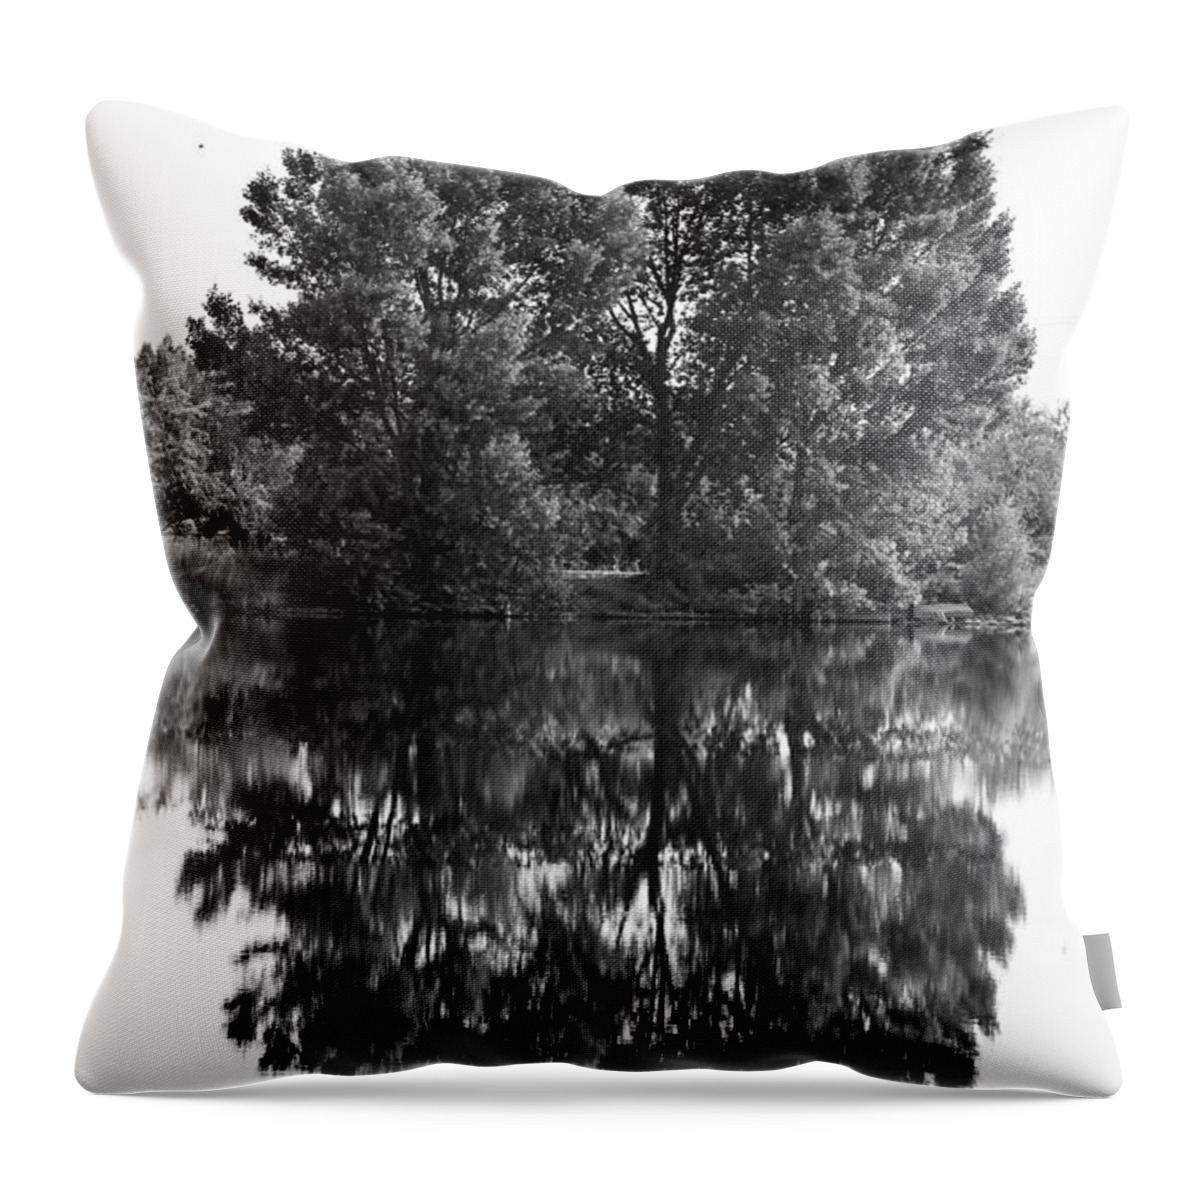 Reflections Throw Pillow featuring the photograph Tree Reflection in Black and White by James BO Insogna